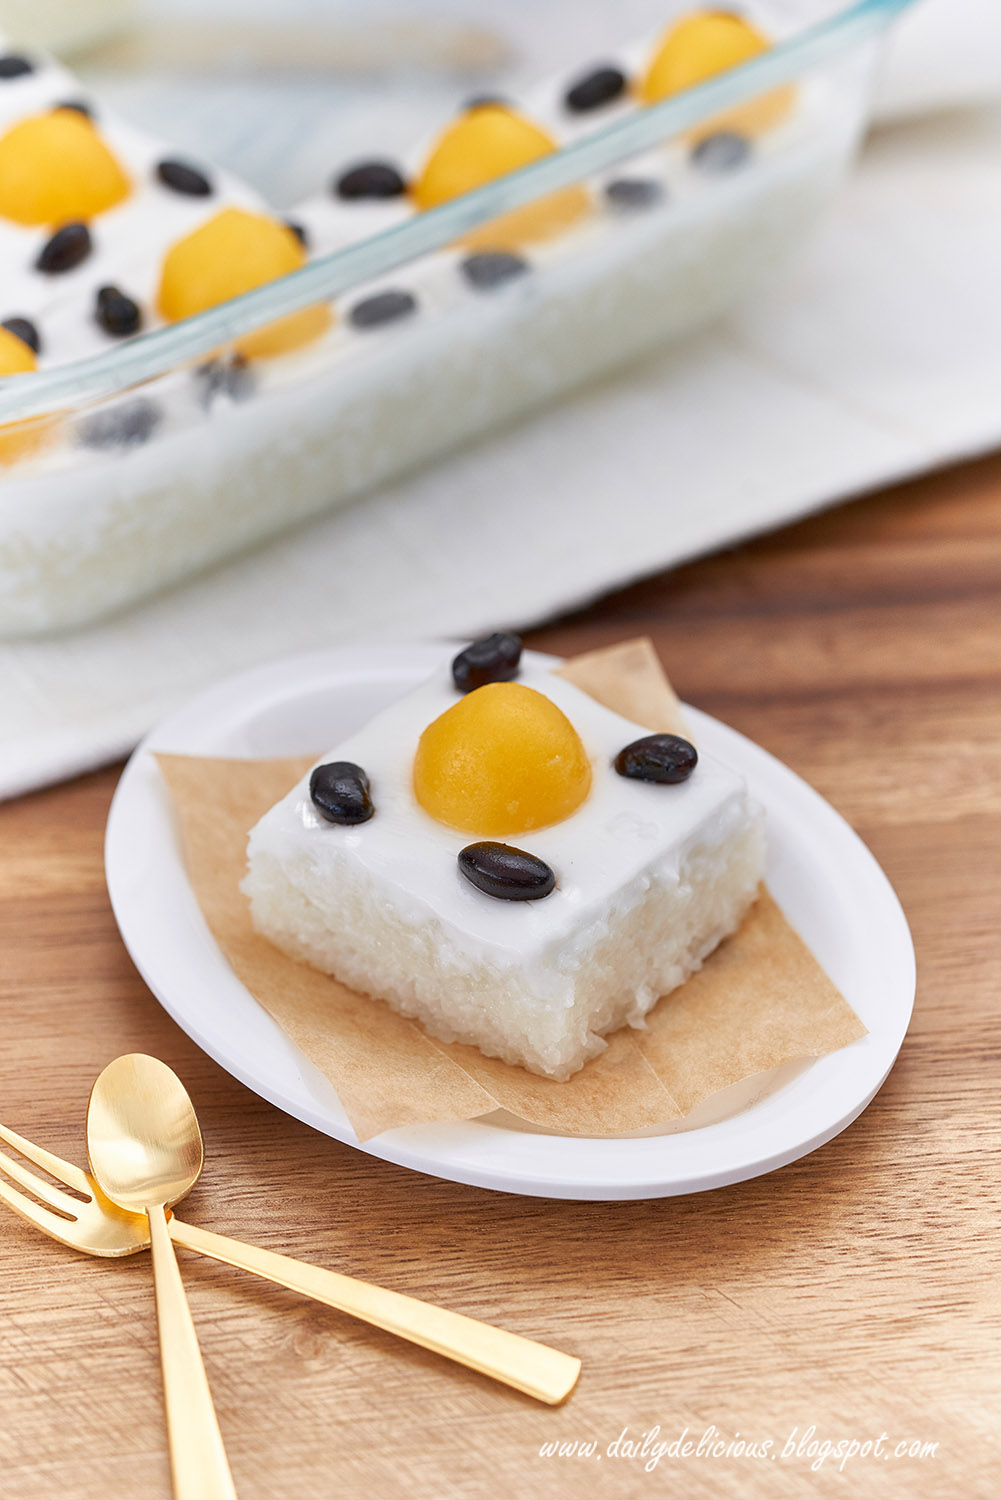 dailydelicious: Sweet Sticky Rice with Coconut Milk Topping: ข้าวเหนียว ...